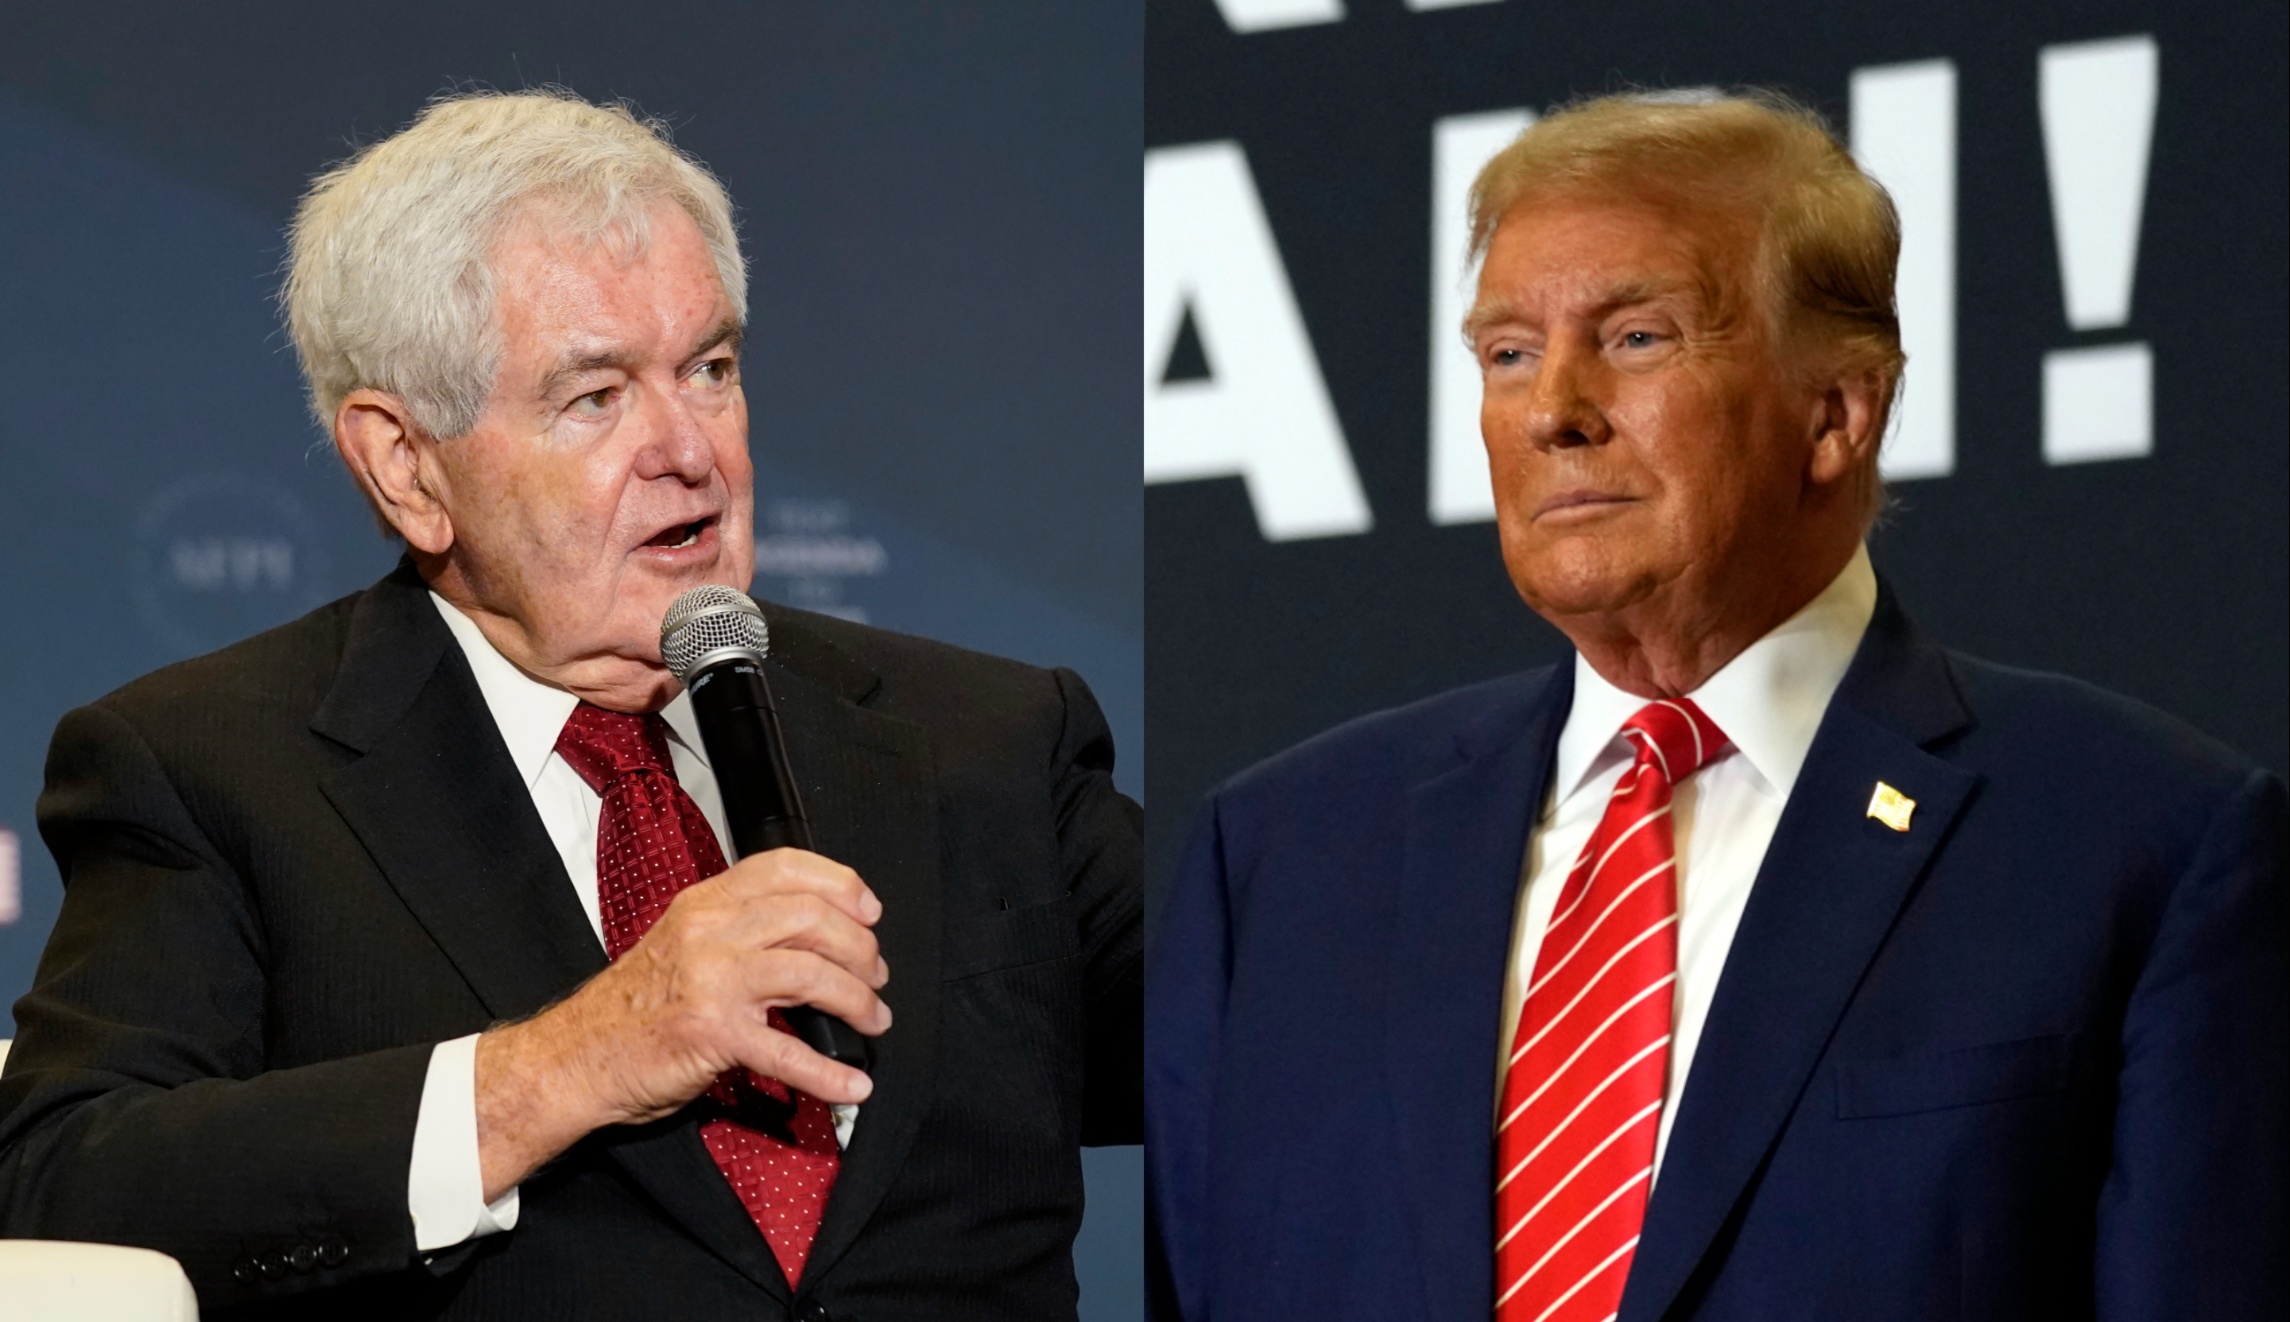 Gingrich predicts Trump will be Republican Party’s 2024 presidential nominee - Washington Examiner